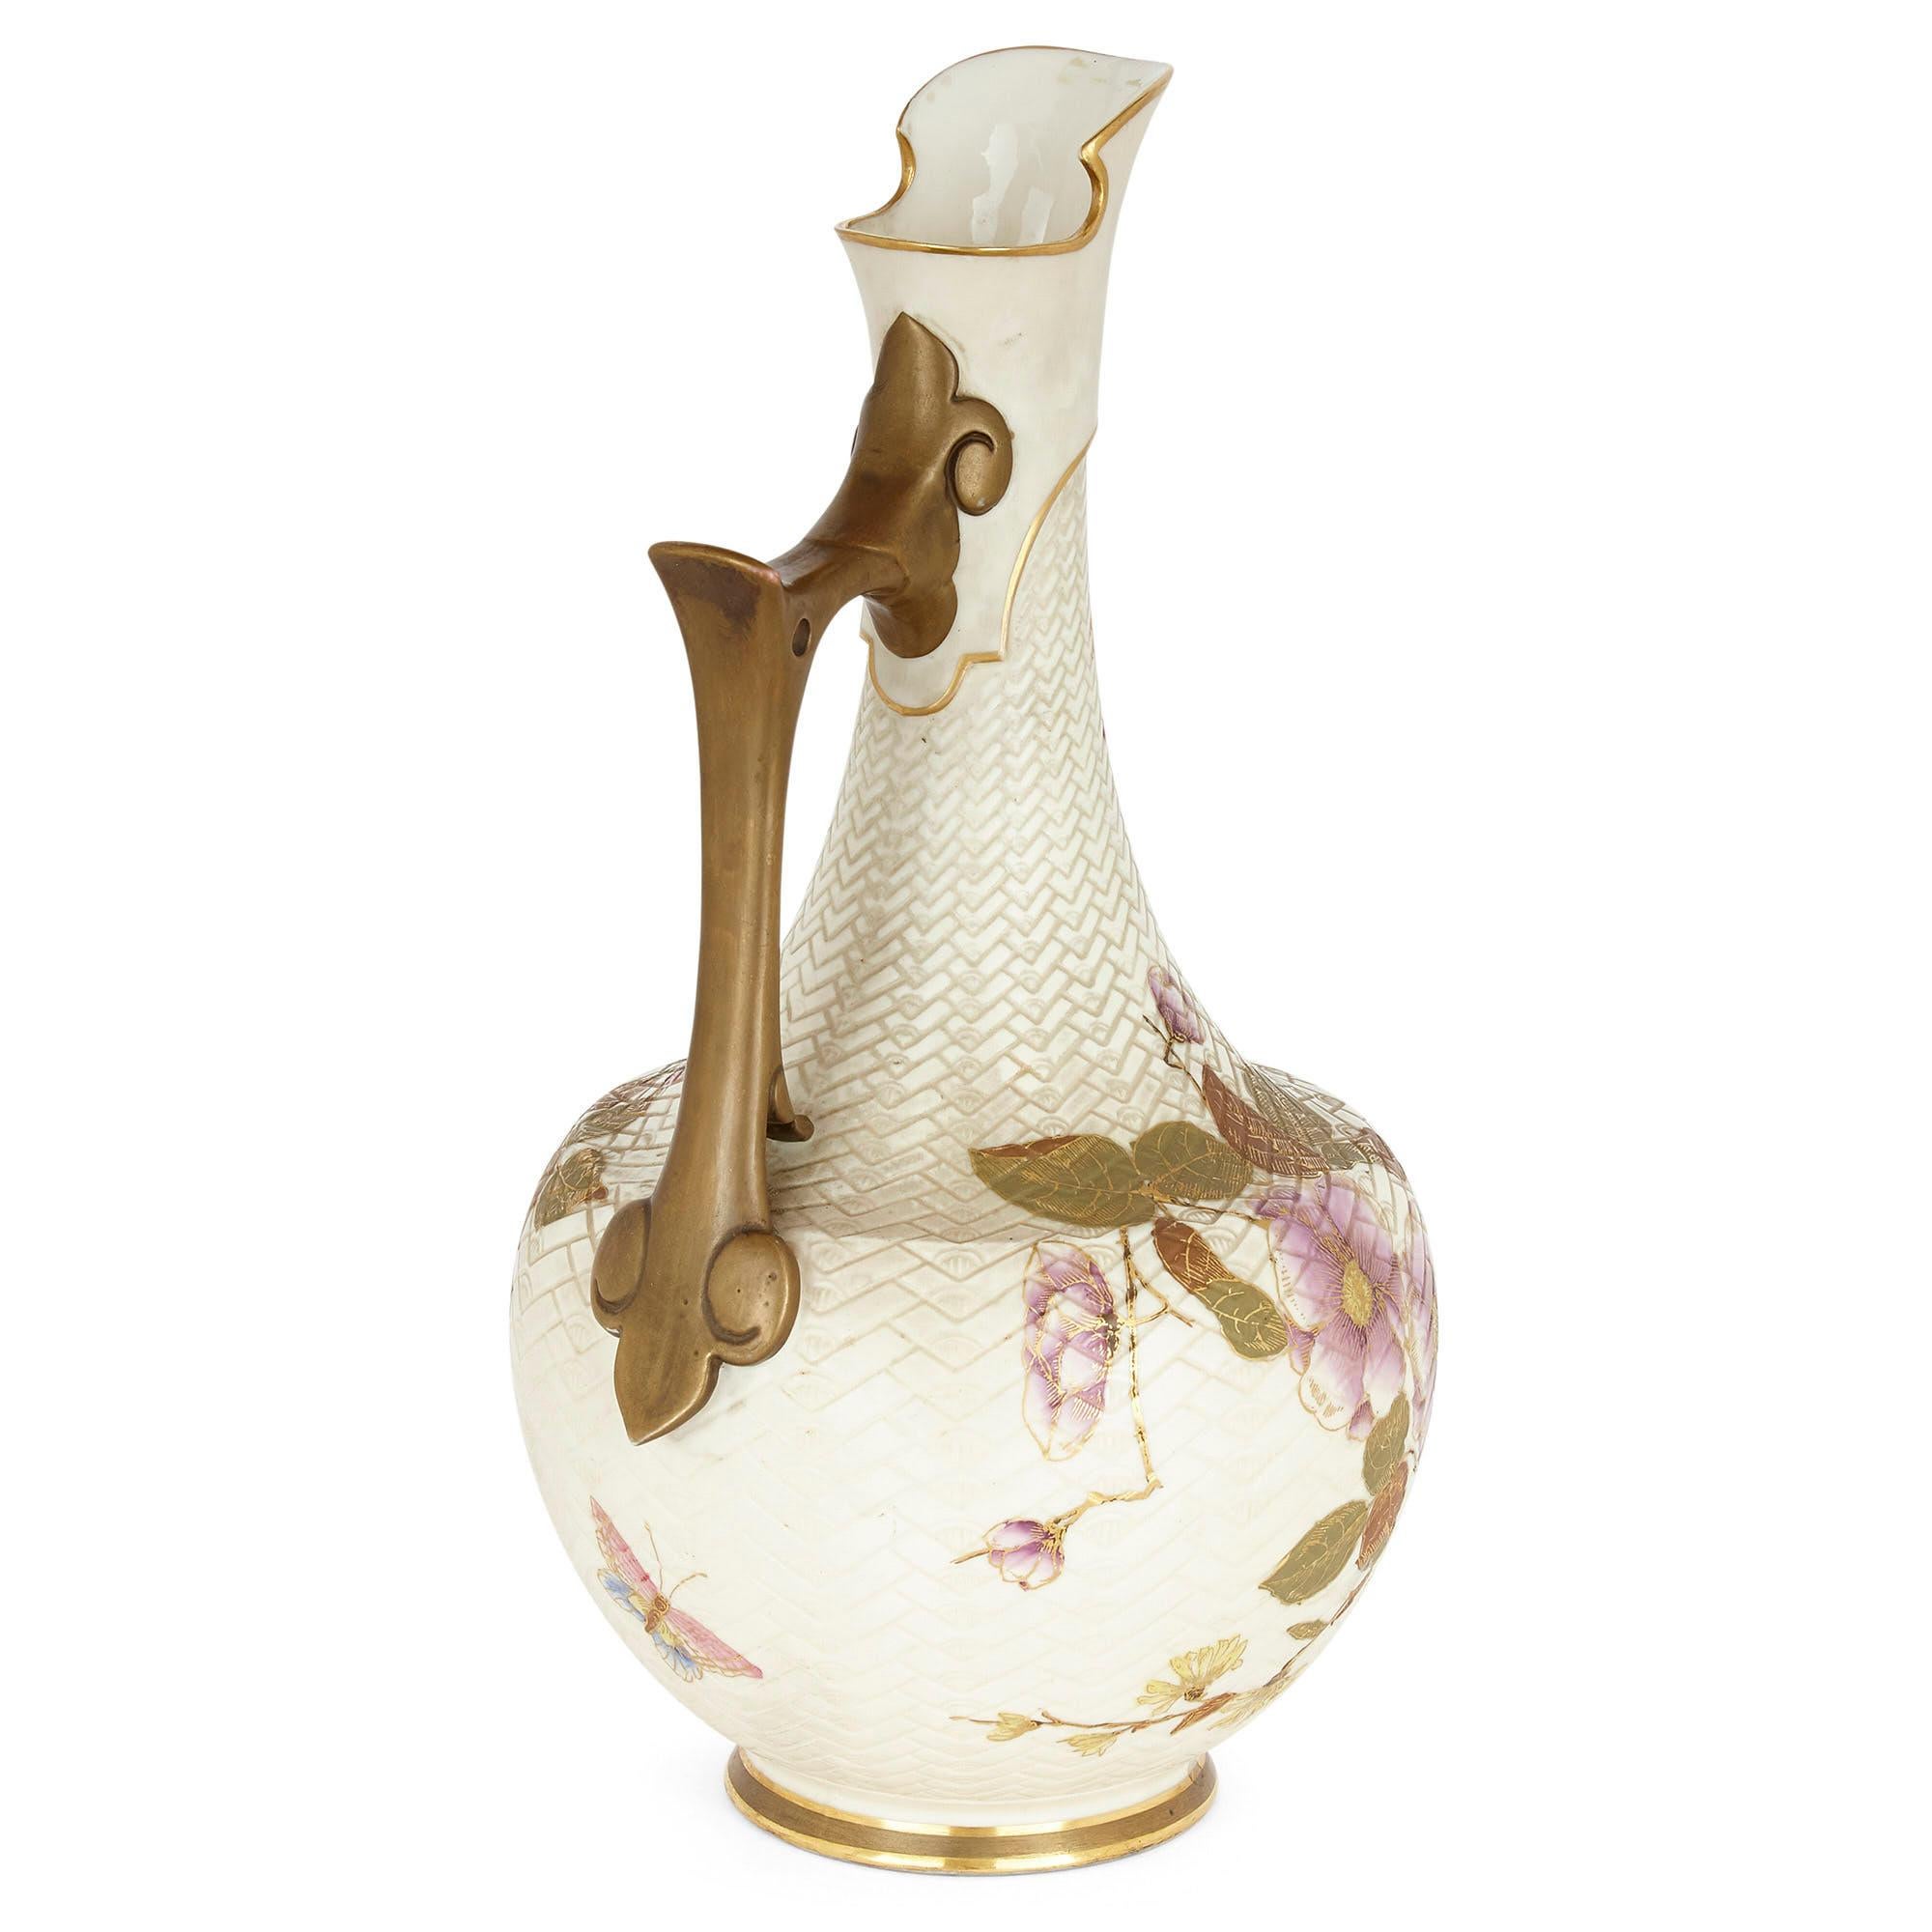 Japanese style English porcelain ewer by Royal Worcester
English, c. 1880
Measures: Height 31cm, diameter 17cm

This beautiful ewer is by the celebrated English porcelain makers Royal Worcester. The ewer is of traditional form, the body crafted